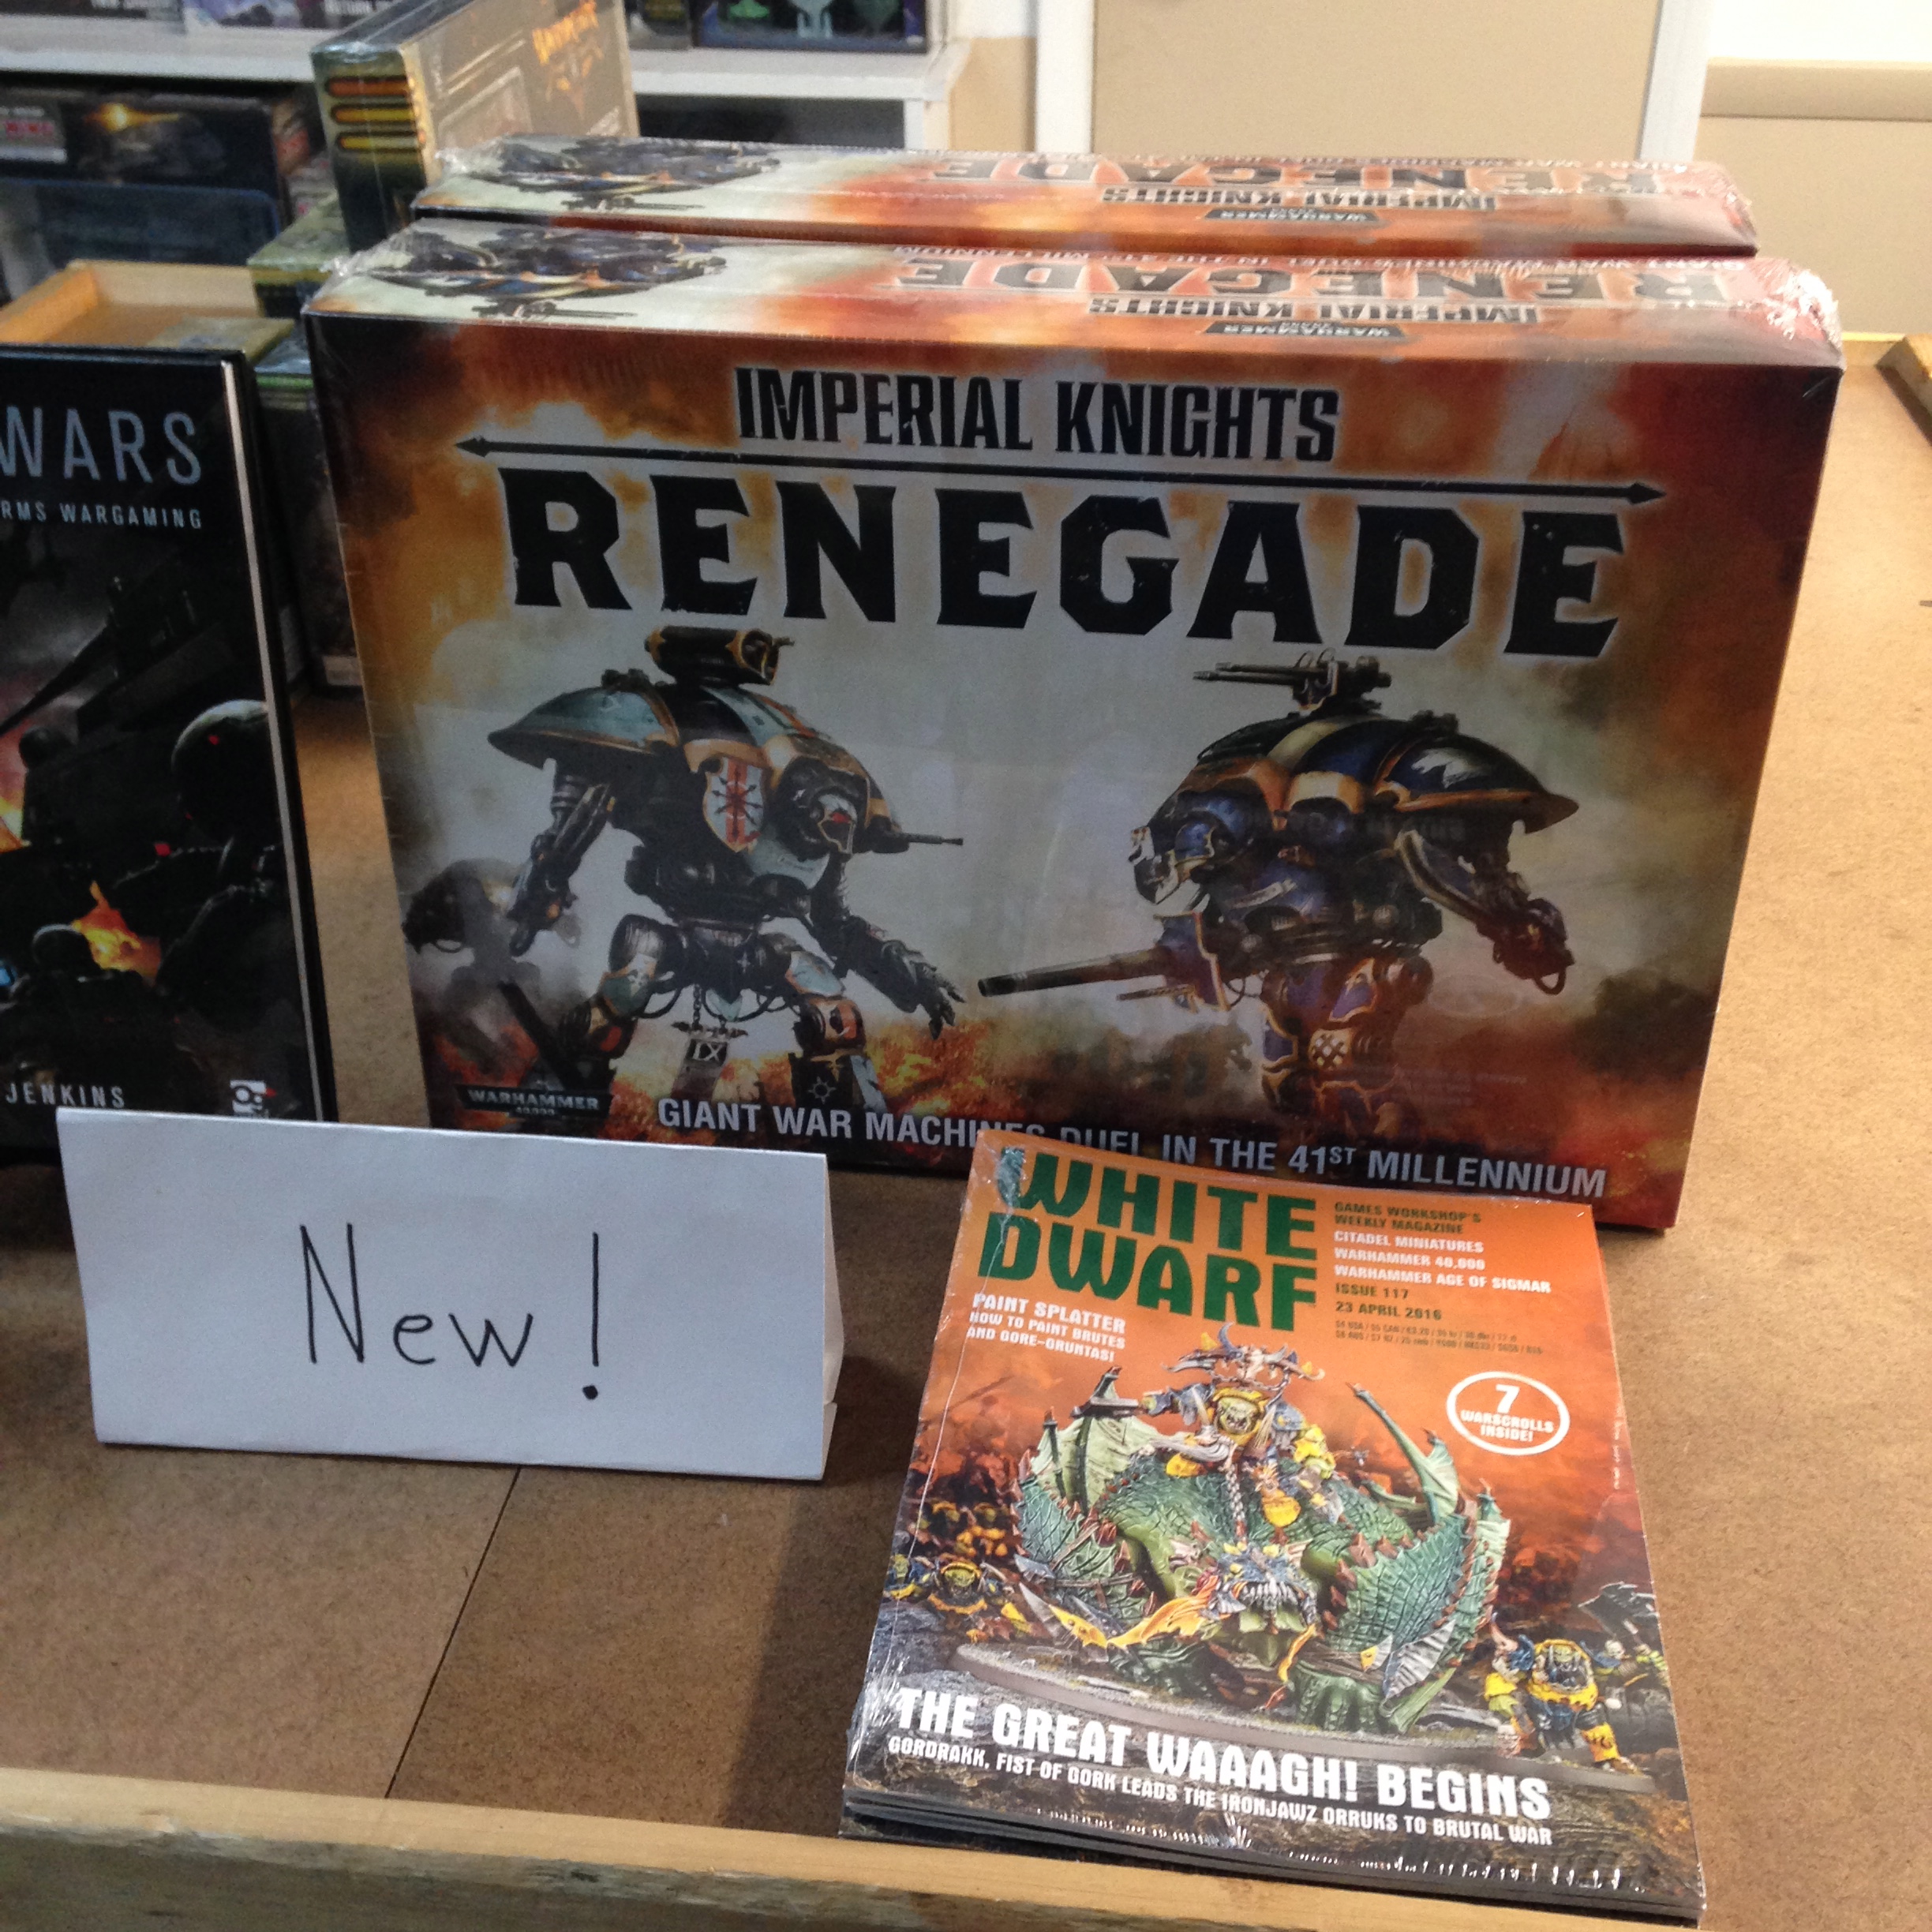 Imperial Knights: Renegade!